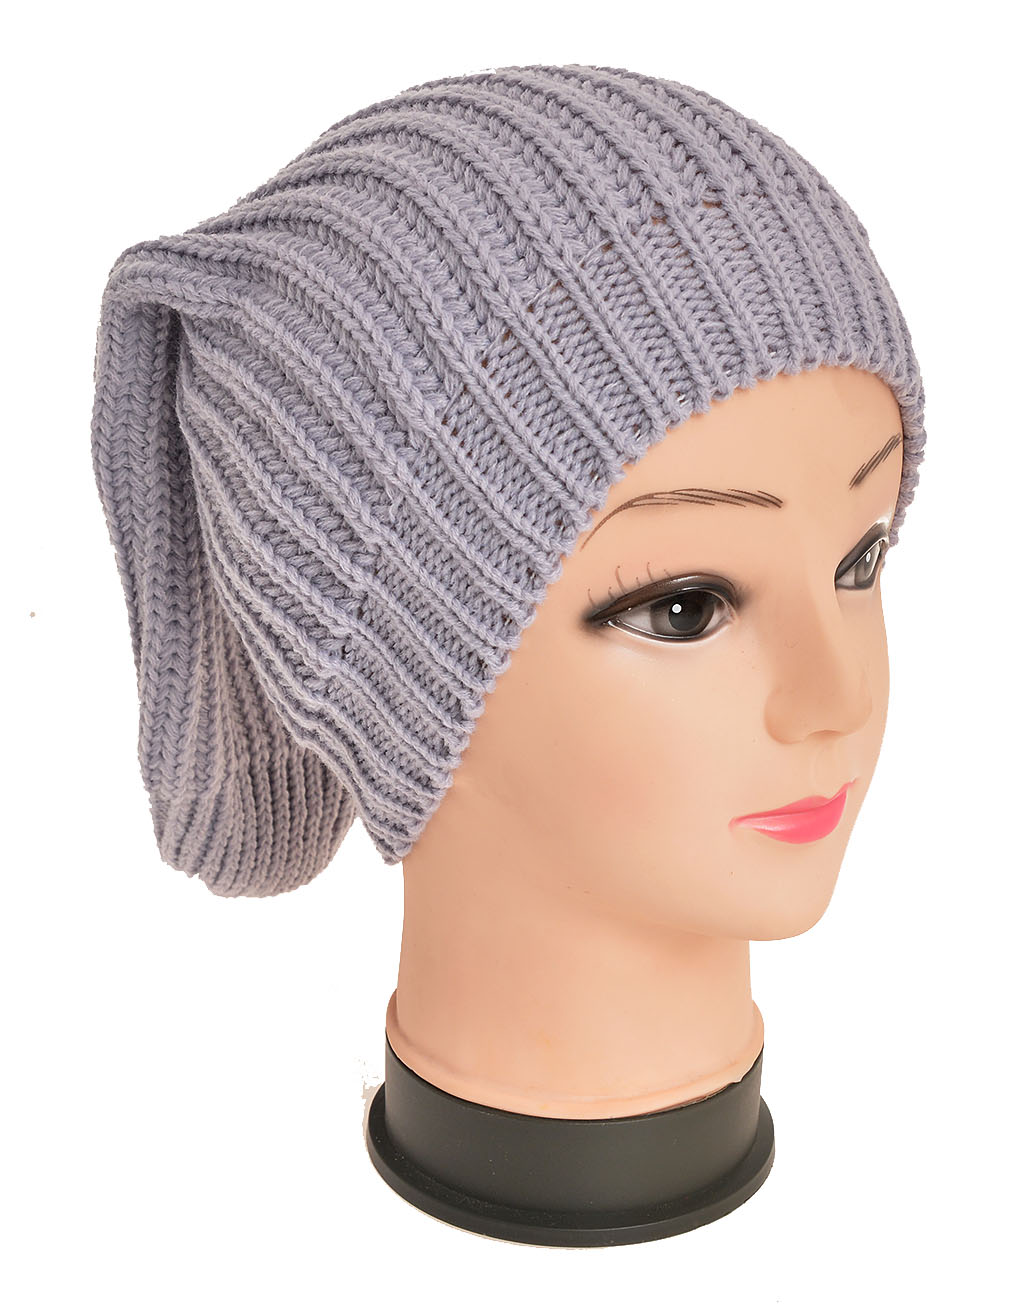 Oversized Beanie Hat Wholesale Prices & Discounts